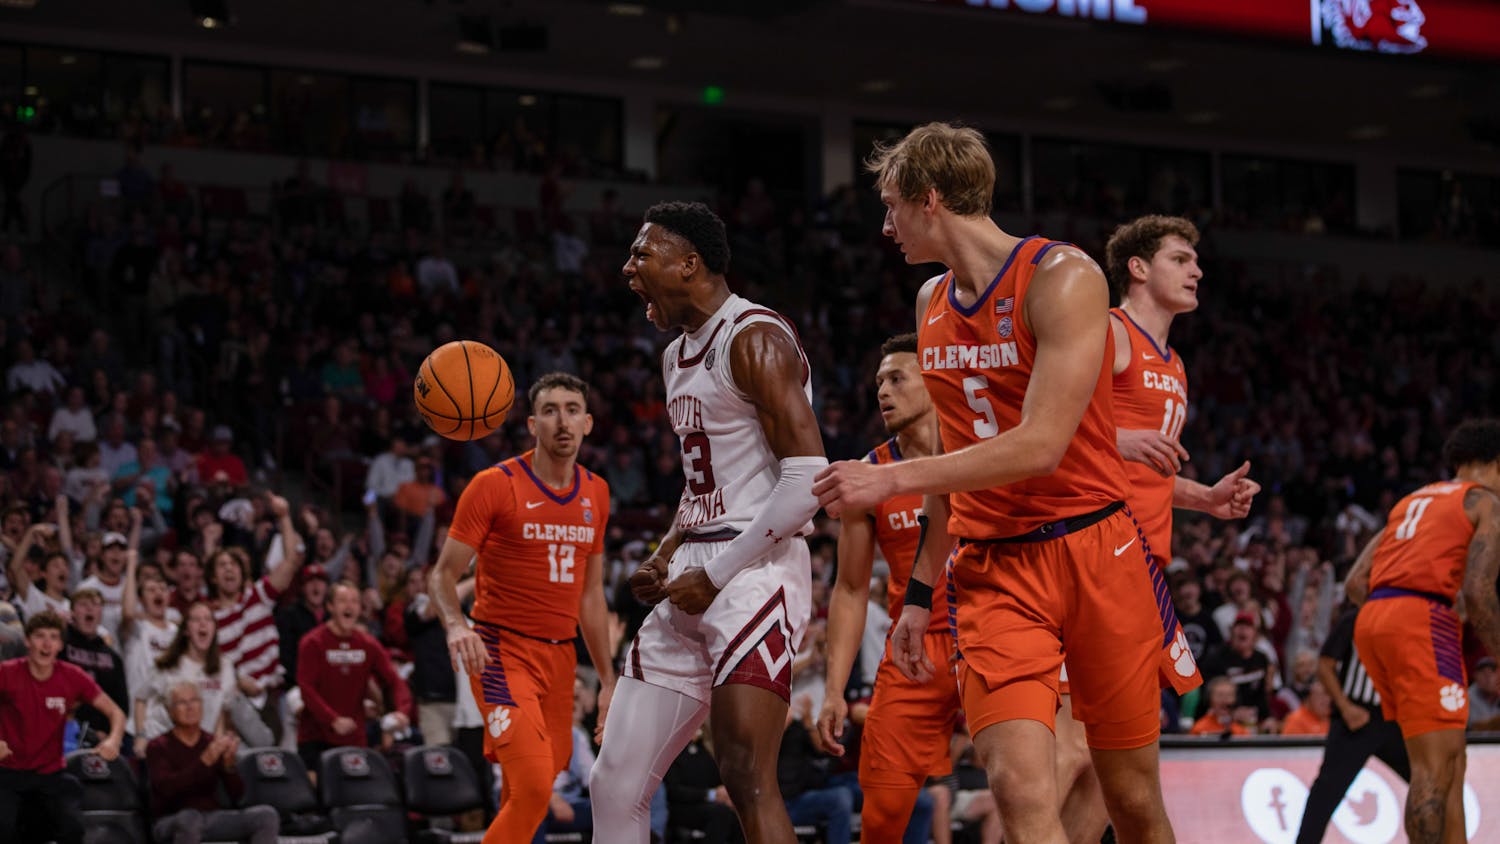 South Carolina had an intense matchup with in-state rival Clemson on Friday Nov. 11, 2022. Senior guard Chico Carter secured the win for the Gamecocks with a buzzer beating shot to end the game. With the 60-58 win, South Carolina is now 2-0 in head coach Lamont Paris' first season.